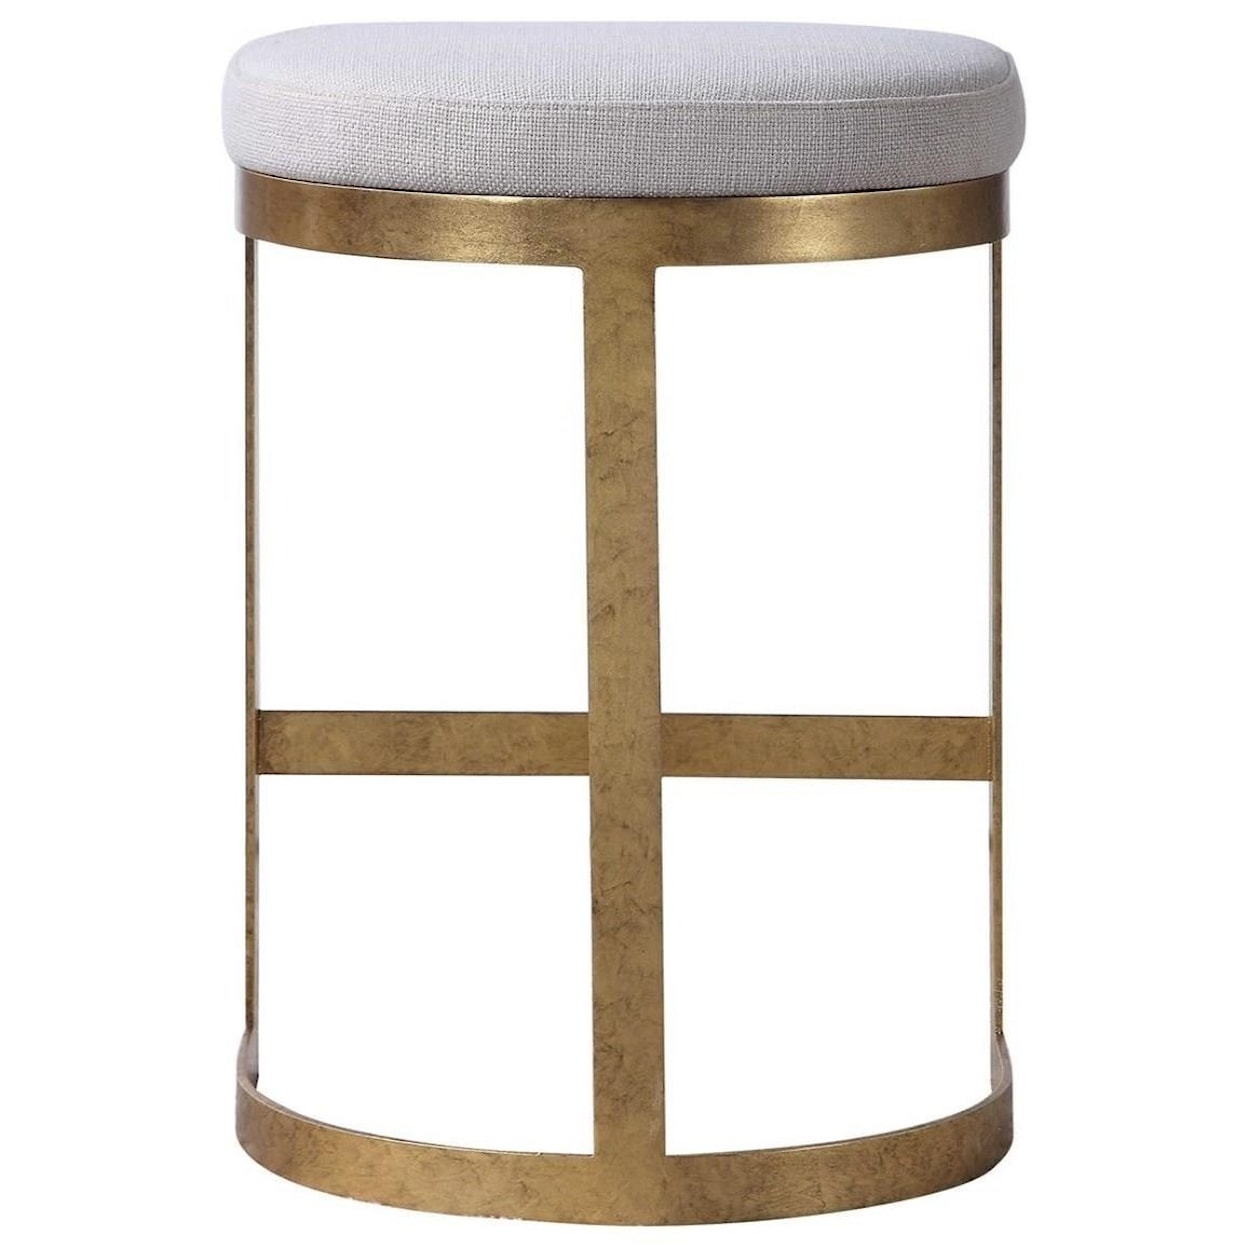 Uttermost Accent Furniture - Stools Ivanna Modern Counter Stool